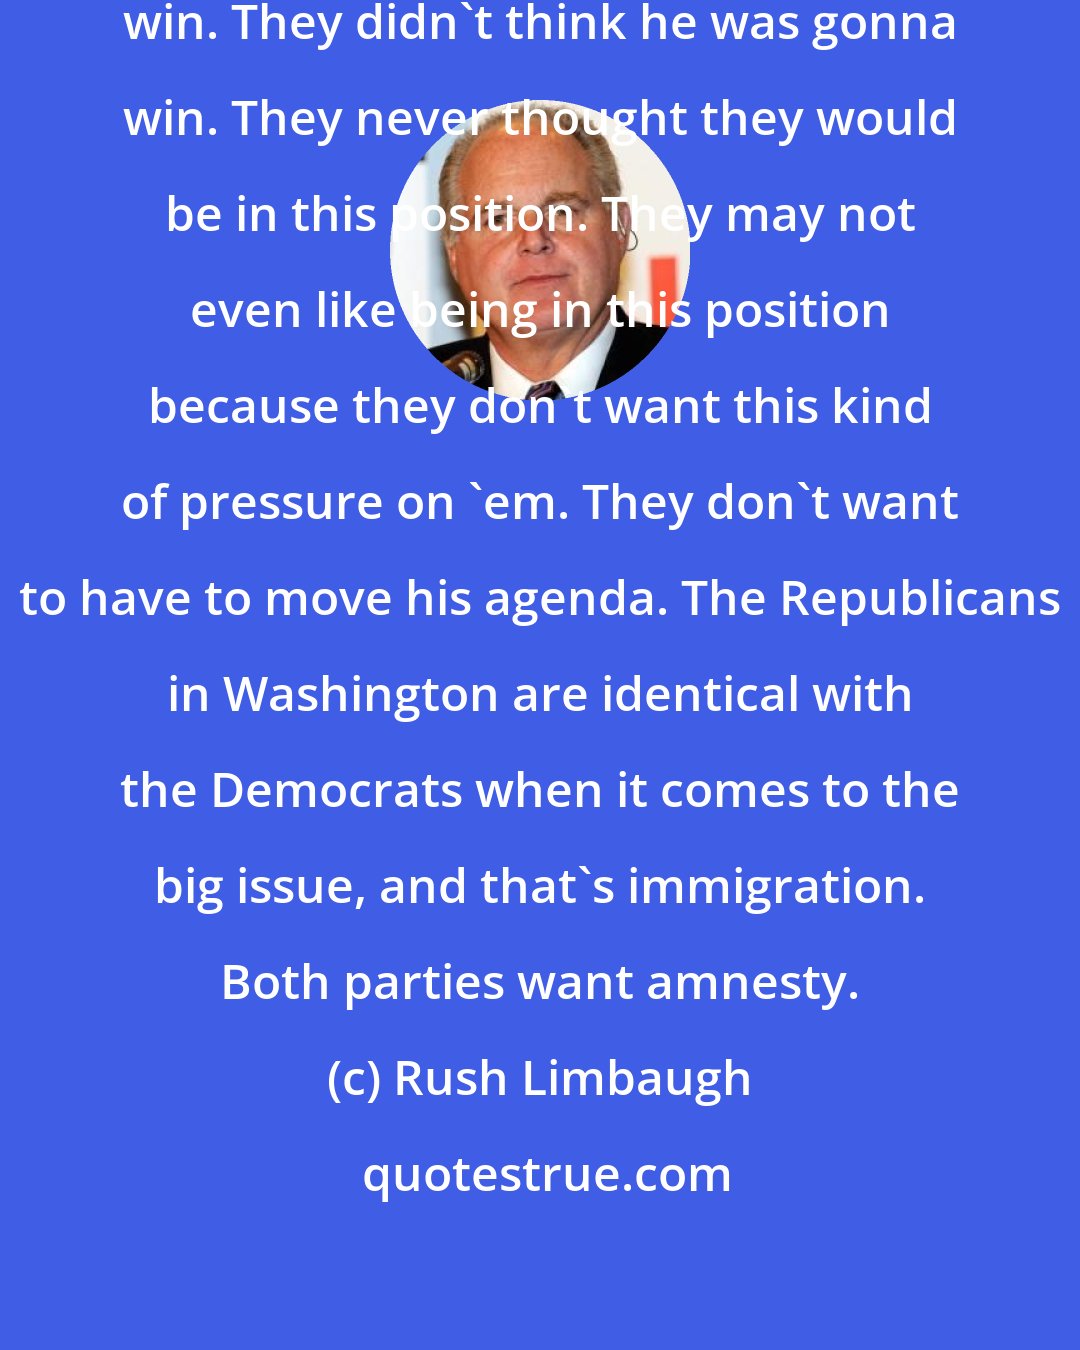 Rush Limbaugh: They didn't want Donald Trump to win. They didn't think he was gonna win. They never thought they would be in this position. They may not even like being in this position because they don't want this kind of pressure on 'em. They don't want to have to move his agenda. The Republicans in Washington are identical with the Democrats when it comes to the big issue, and that's immigration. Both parties want amnesty.